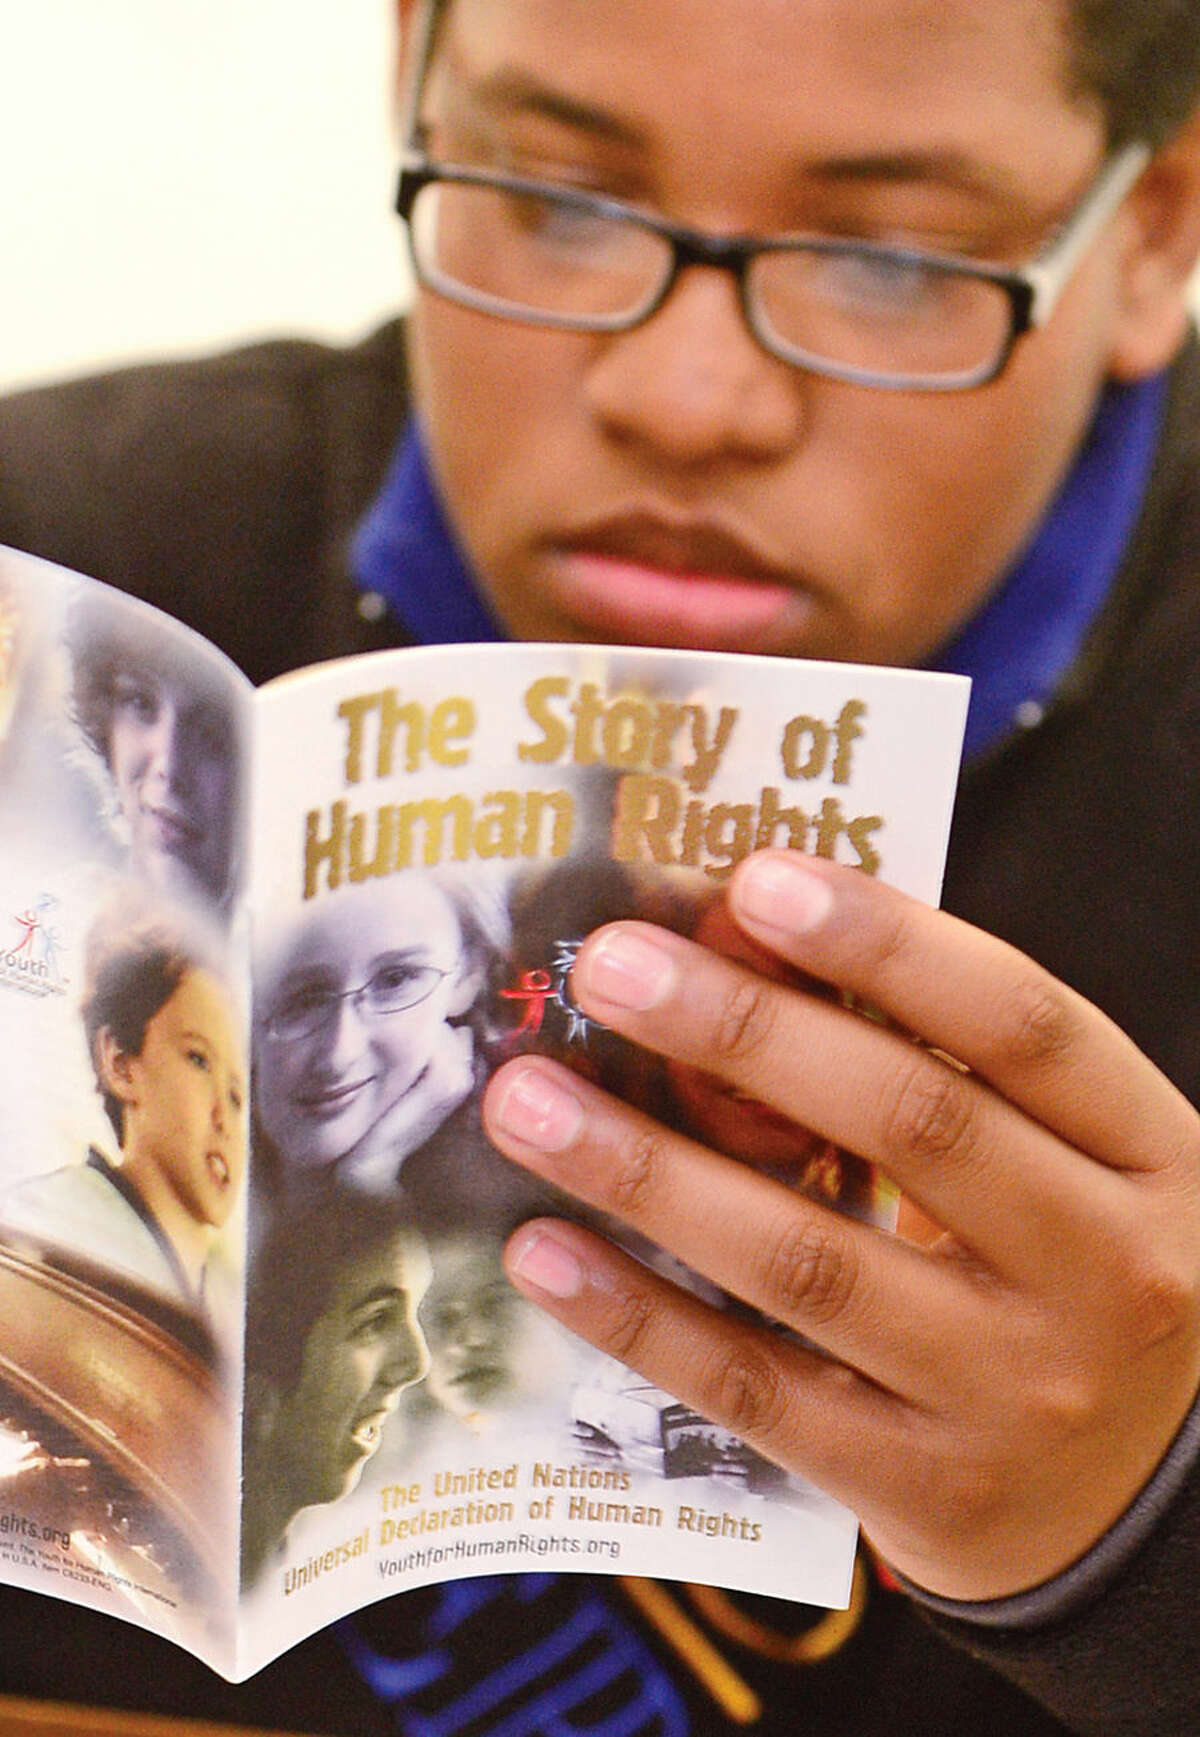 Hour photo / Erik Trautmann 7th grader Clive Bey reads about human rights during the Reerend Al Dancy's Pen or Pencil program at West Rocks Middle School that helps mentor 7th grade boys with discipline problems.